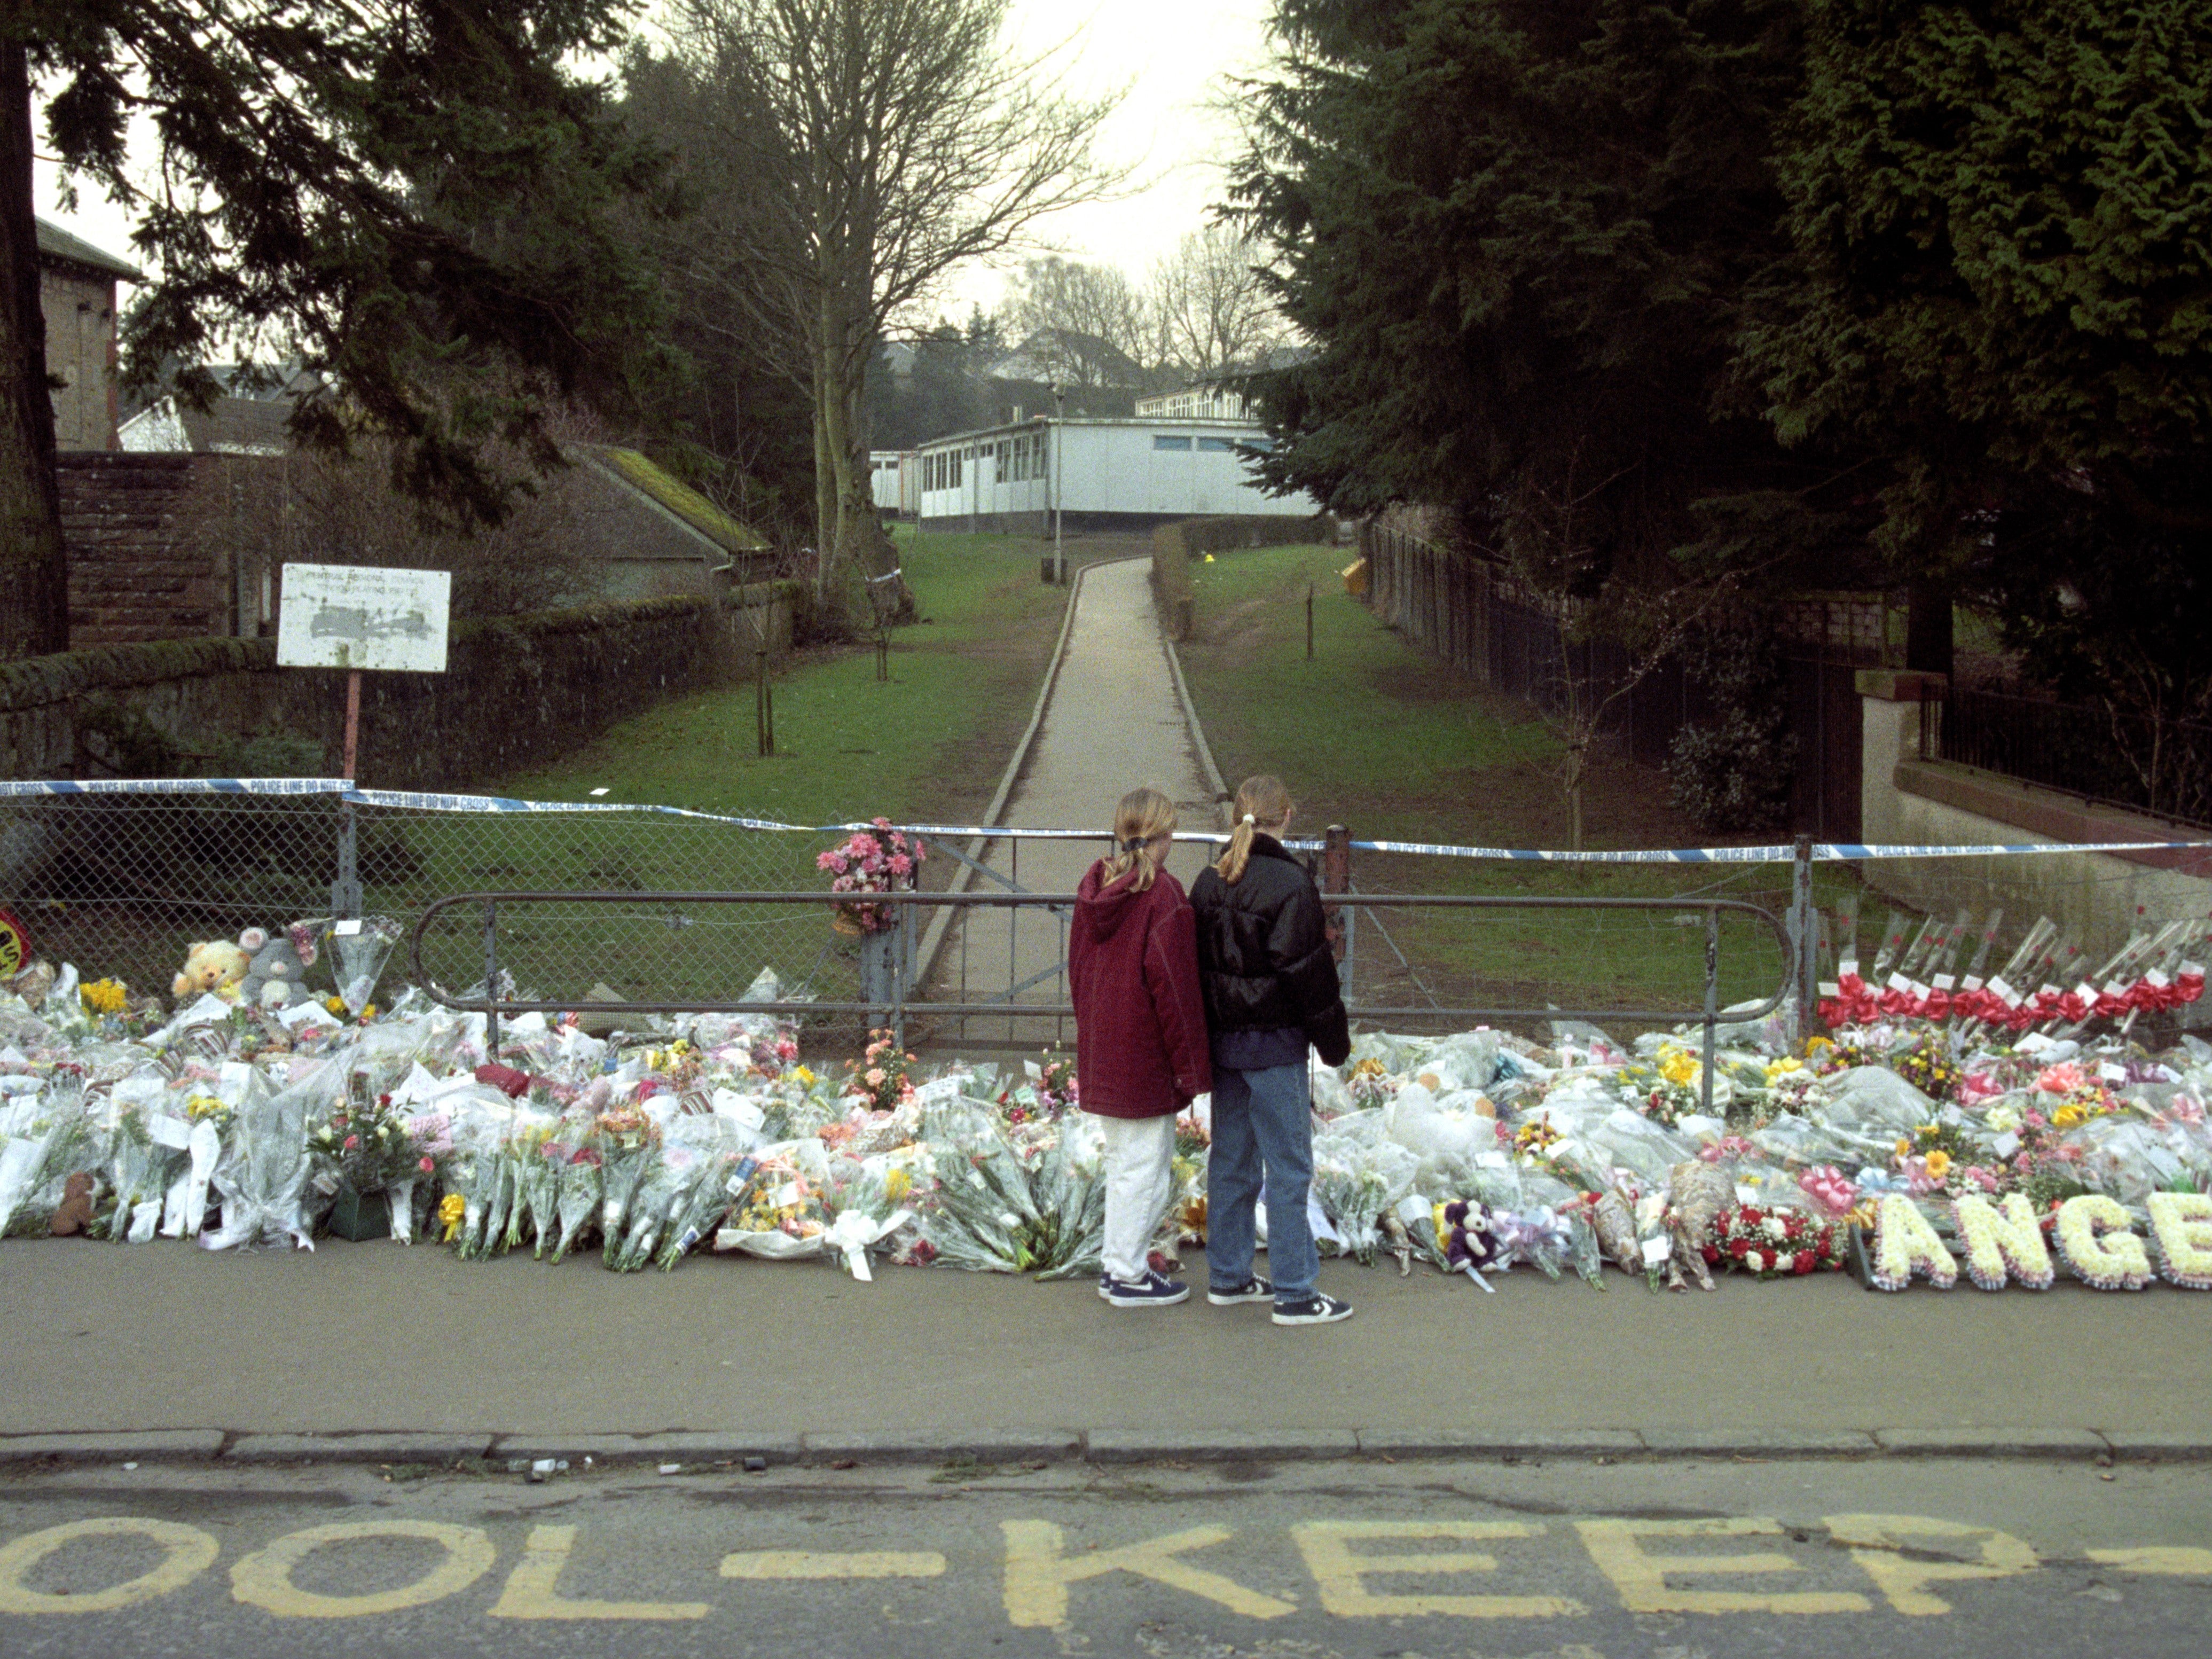 Two children stand in front of the flower tribute to those who died at Dunblane Primary School